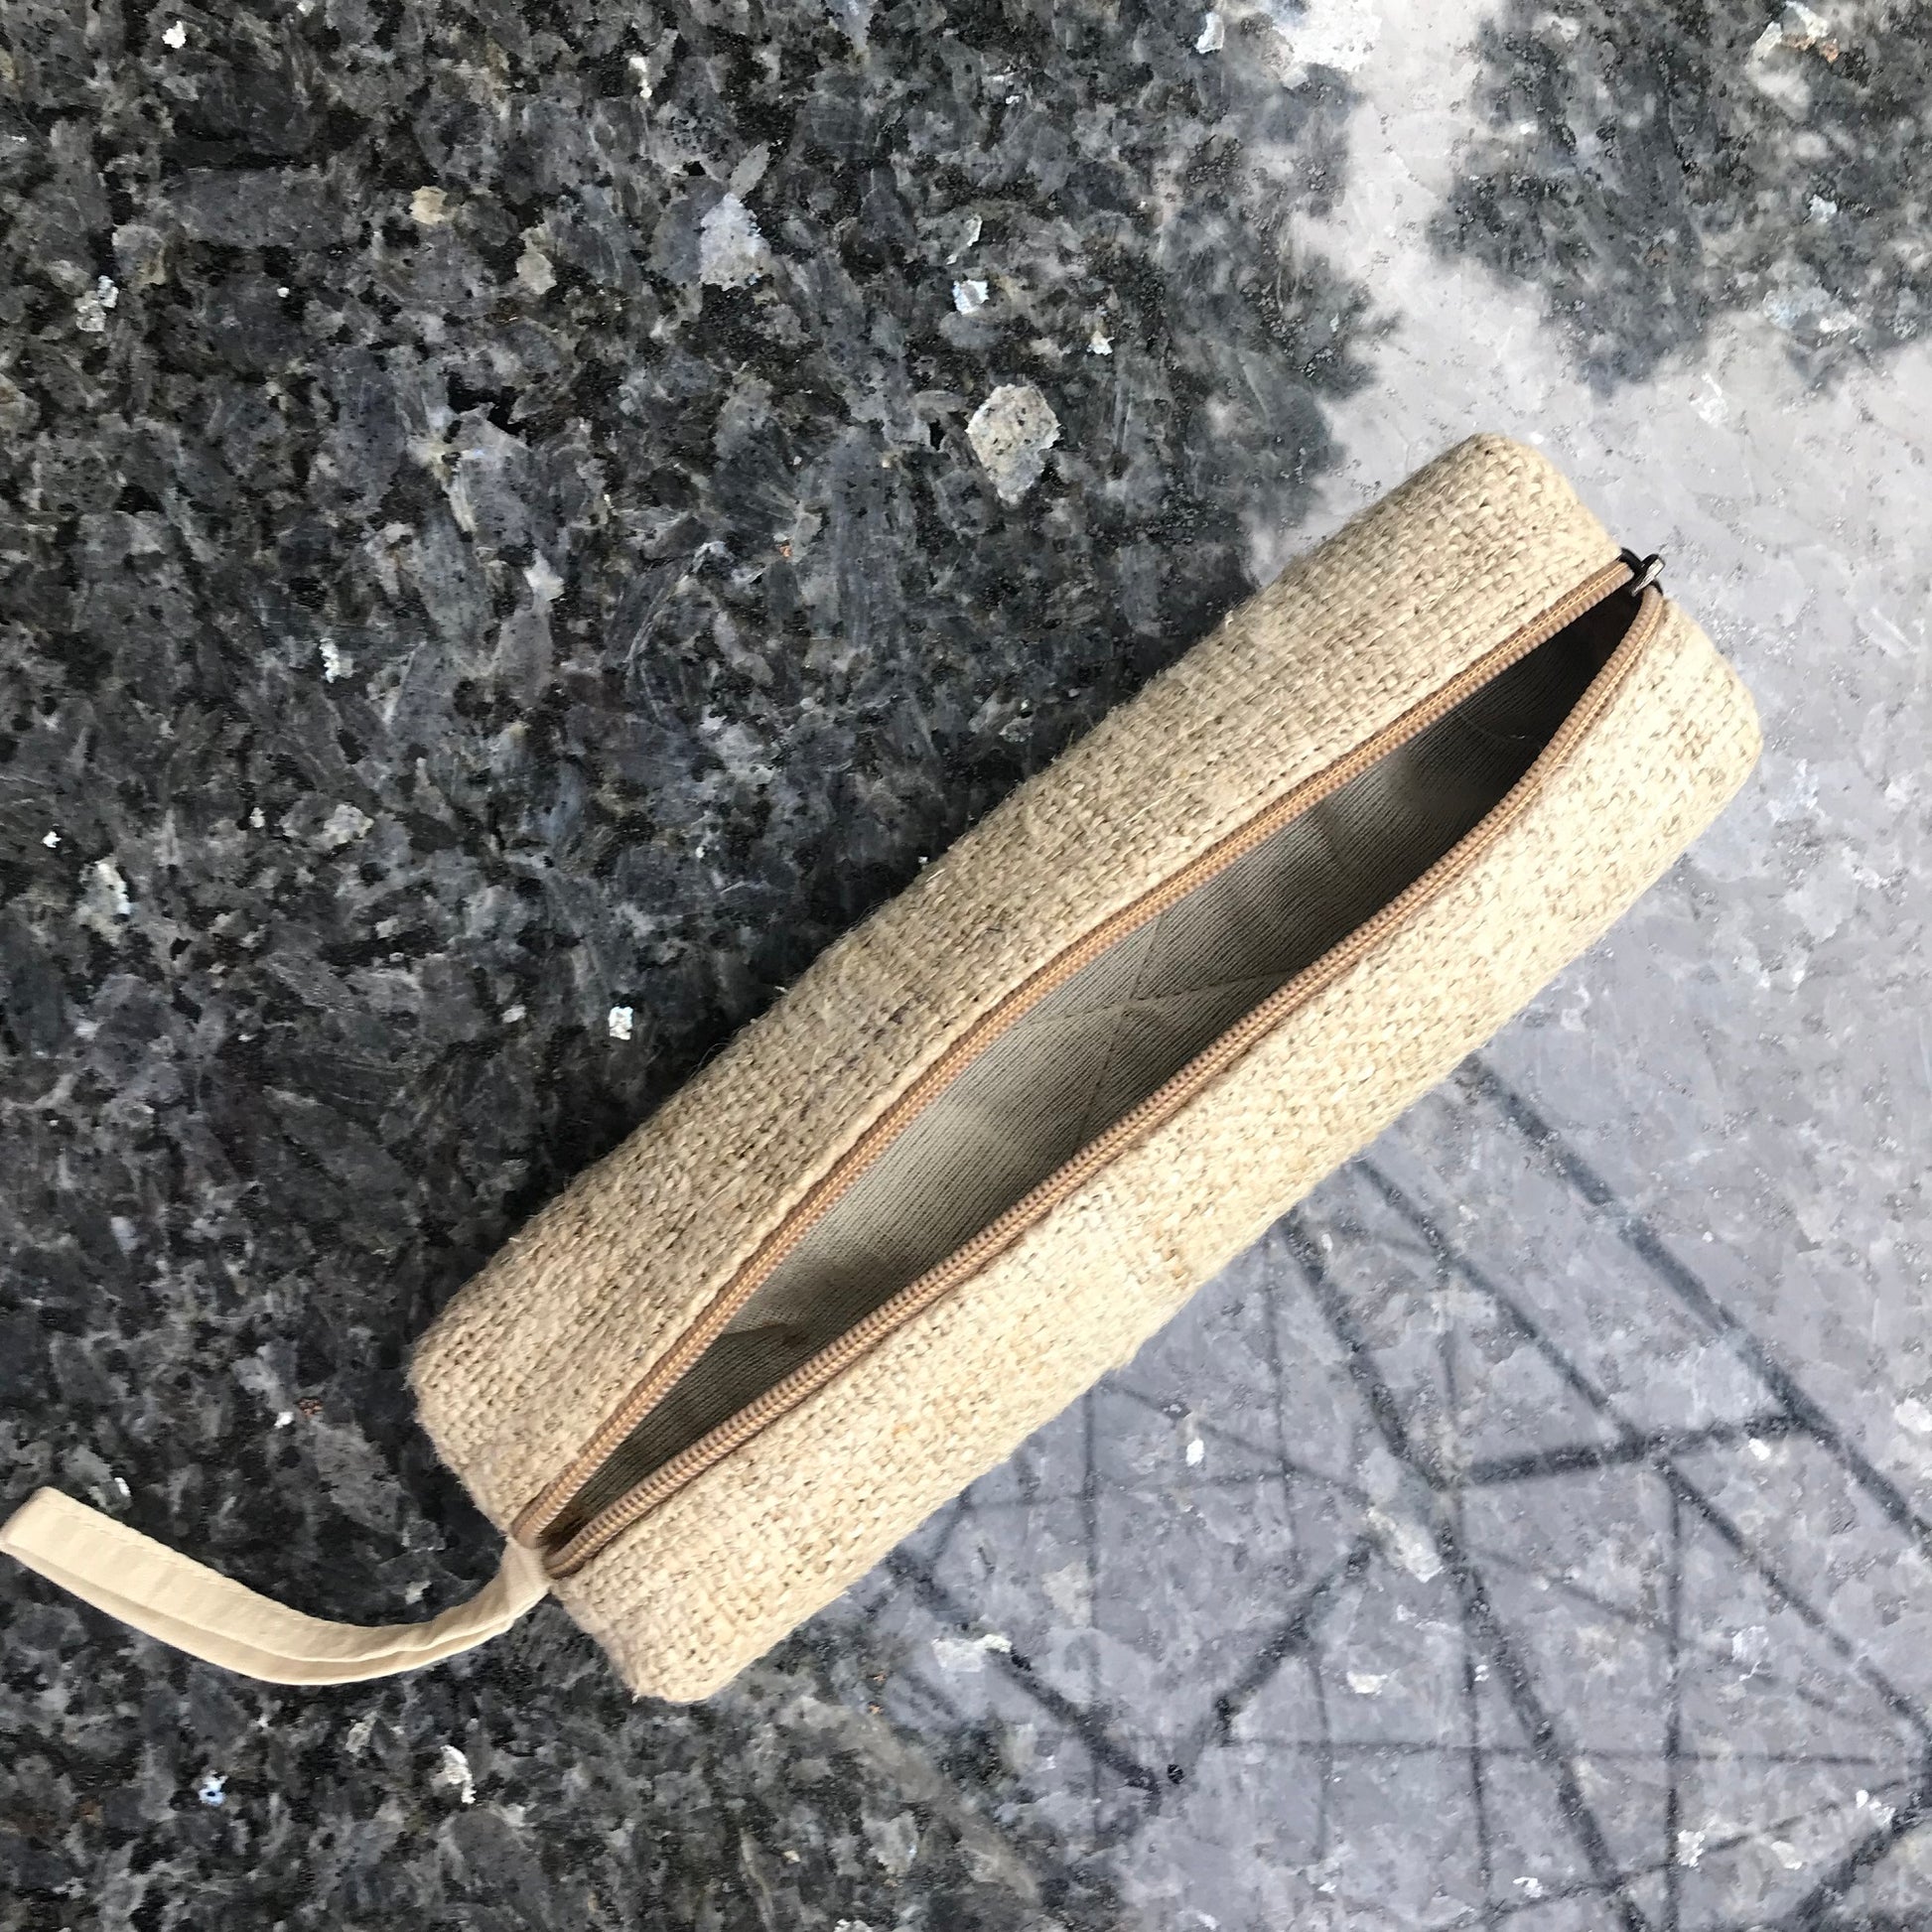 Travel pouch made from 100% pure hemp